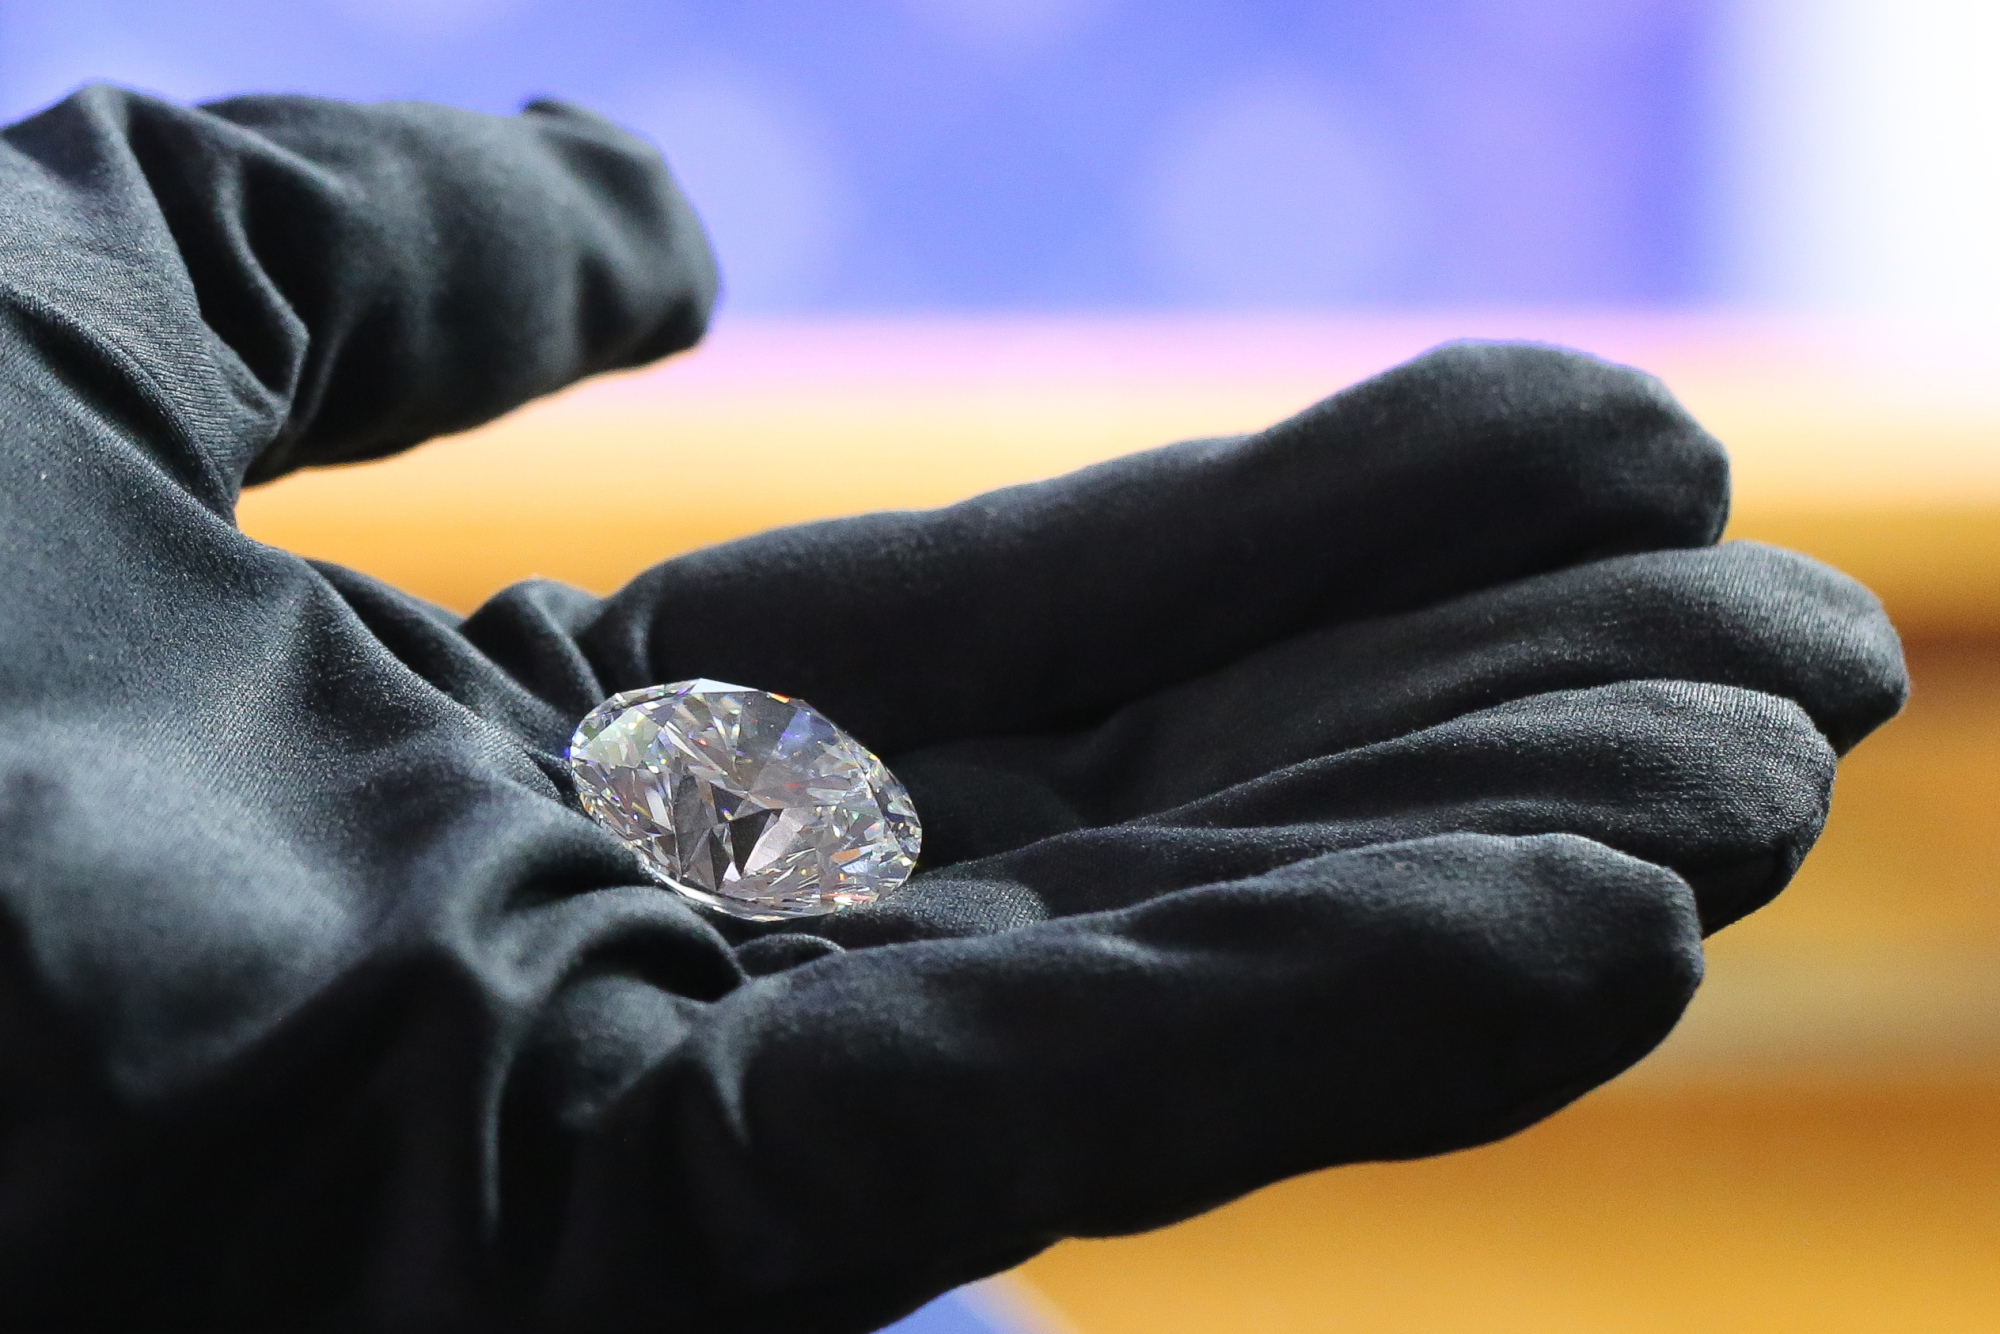 The world's rarest, biggest and most expensive diamonds